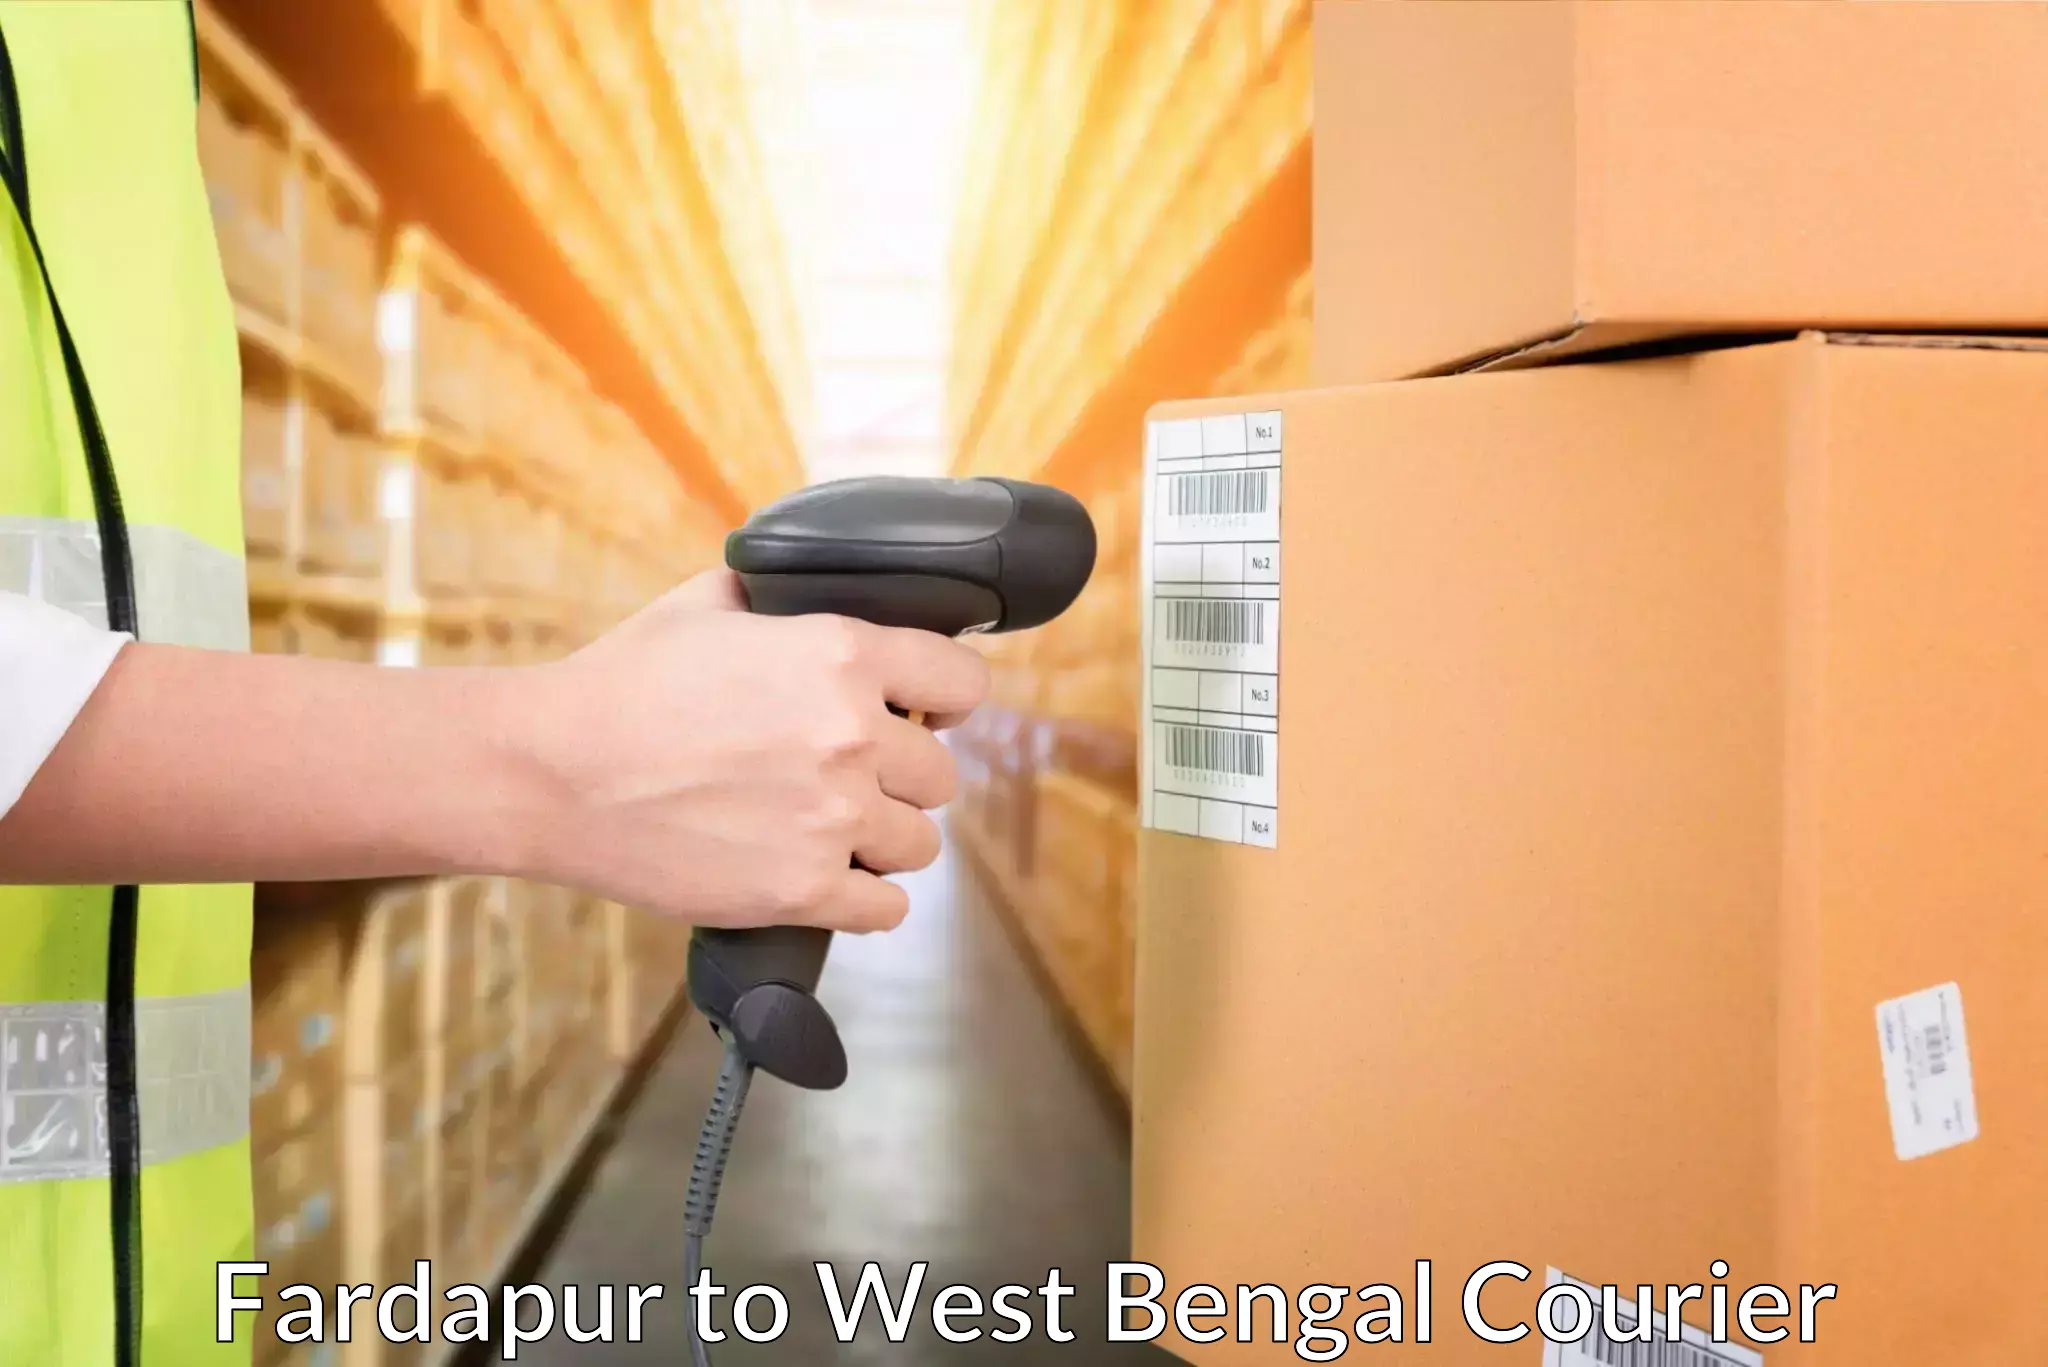 Weekend courier service Fardapur to Belgharia